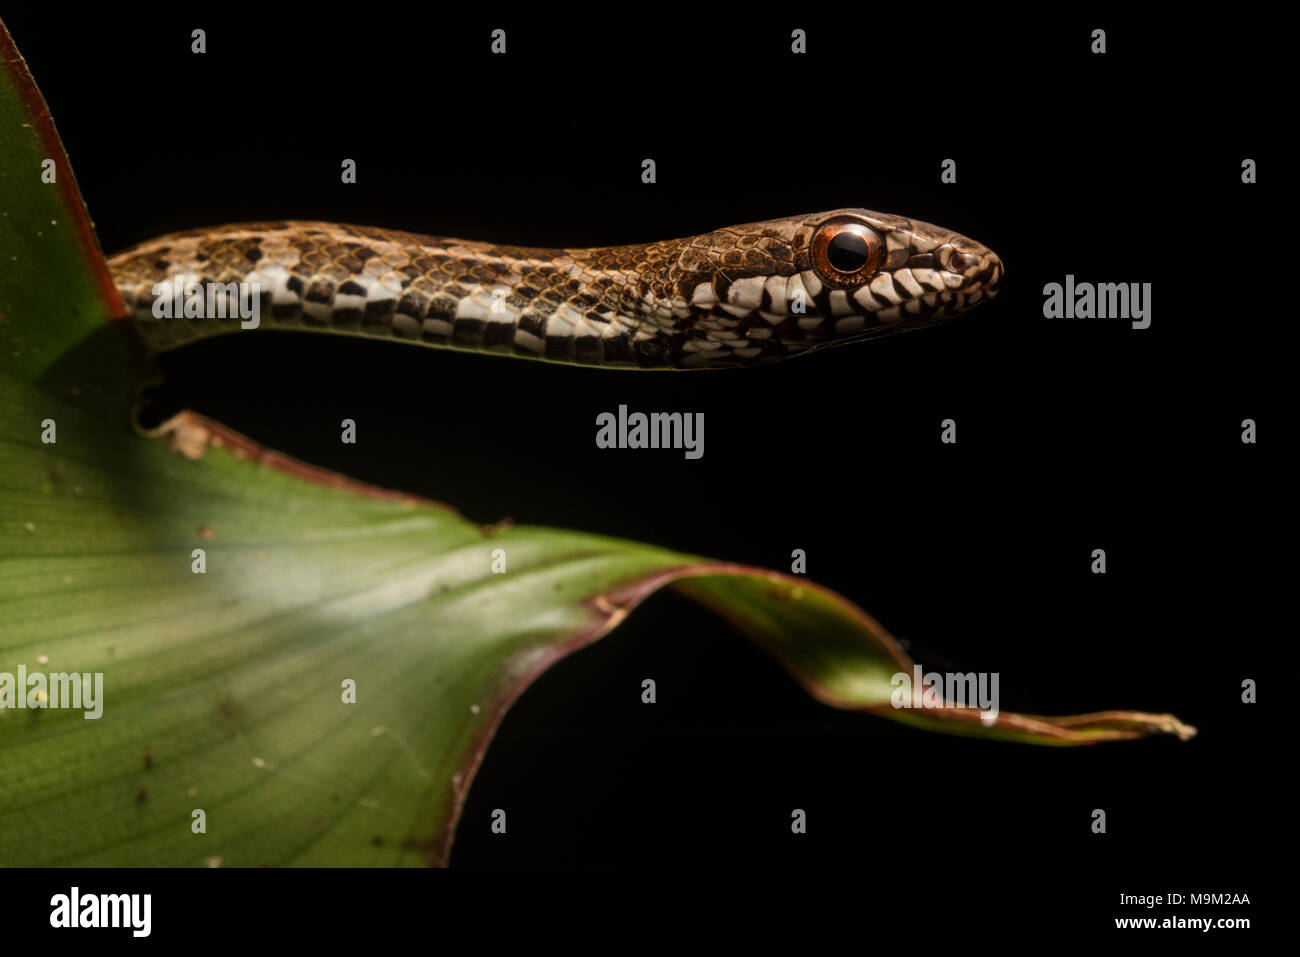 A tropical racer snake peeking over the edge of a leaf at night, They sleep on vegetation above the ground and descend to ground level during the day. Stock Photo